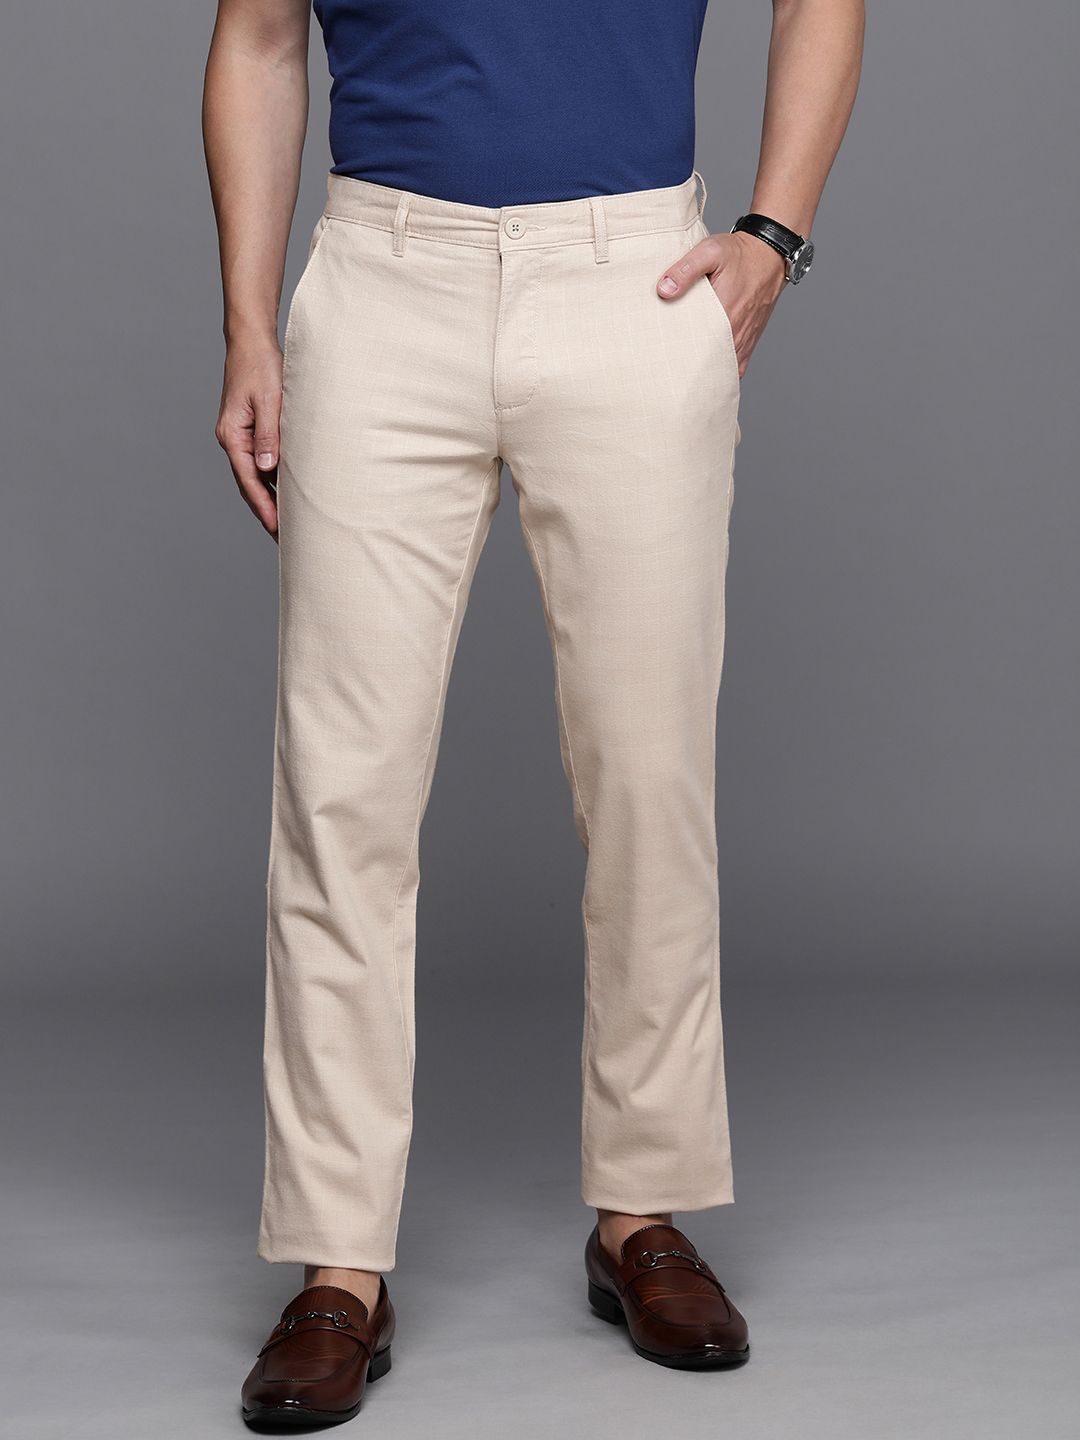 Buy Louis Philippe Jeans Louis Philippe Jeans Men Comfy Tapered Fit  Mid-Rise Plain Woven Flat-Front Chinos at Redfynd